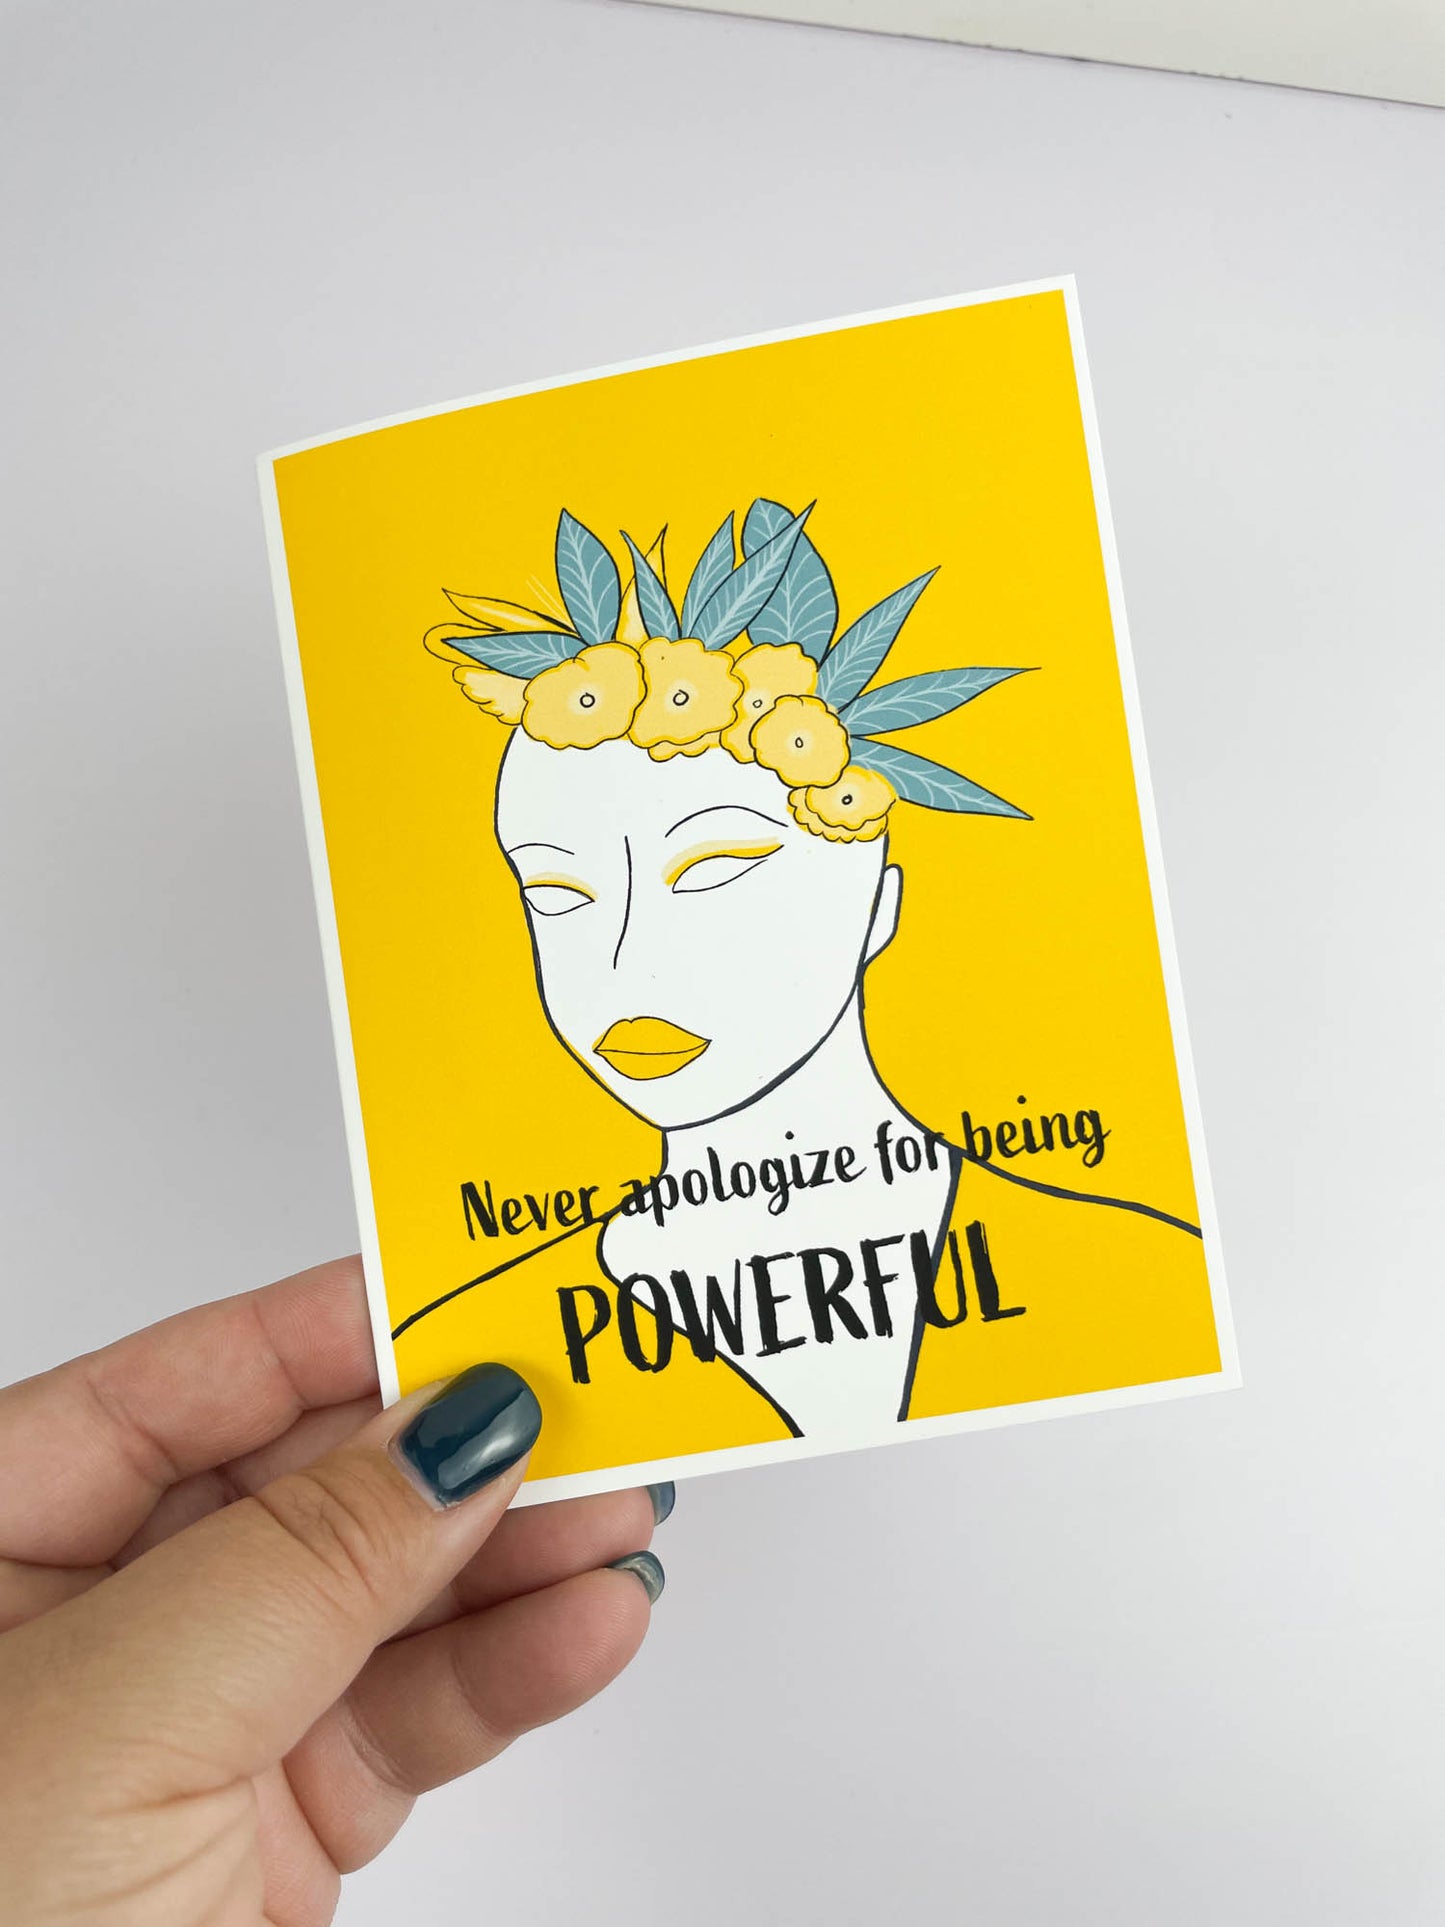 African American Empowerment Greeting Card Bundle | Celebrate and Uplift Your Community with Stunning Artwork and Powerful Messages | Apple Falls Prints